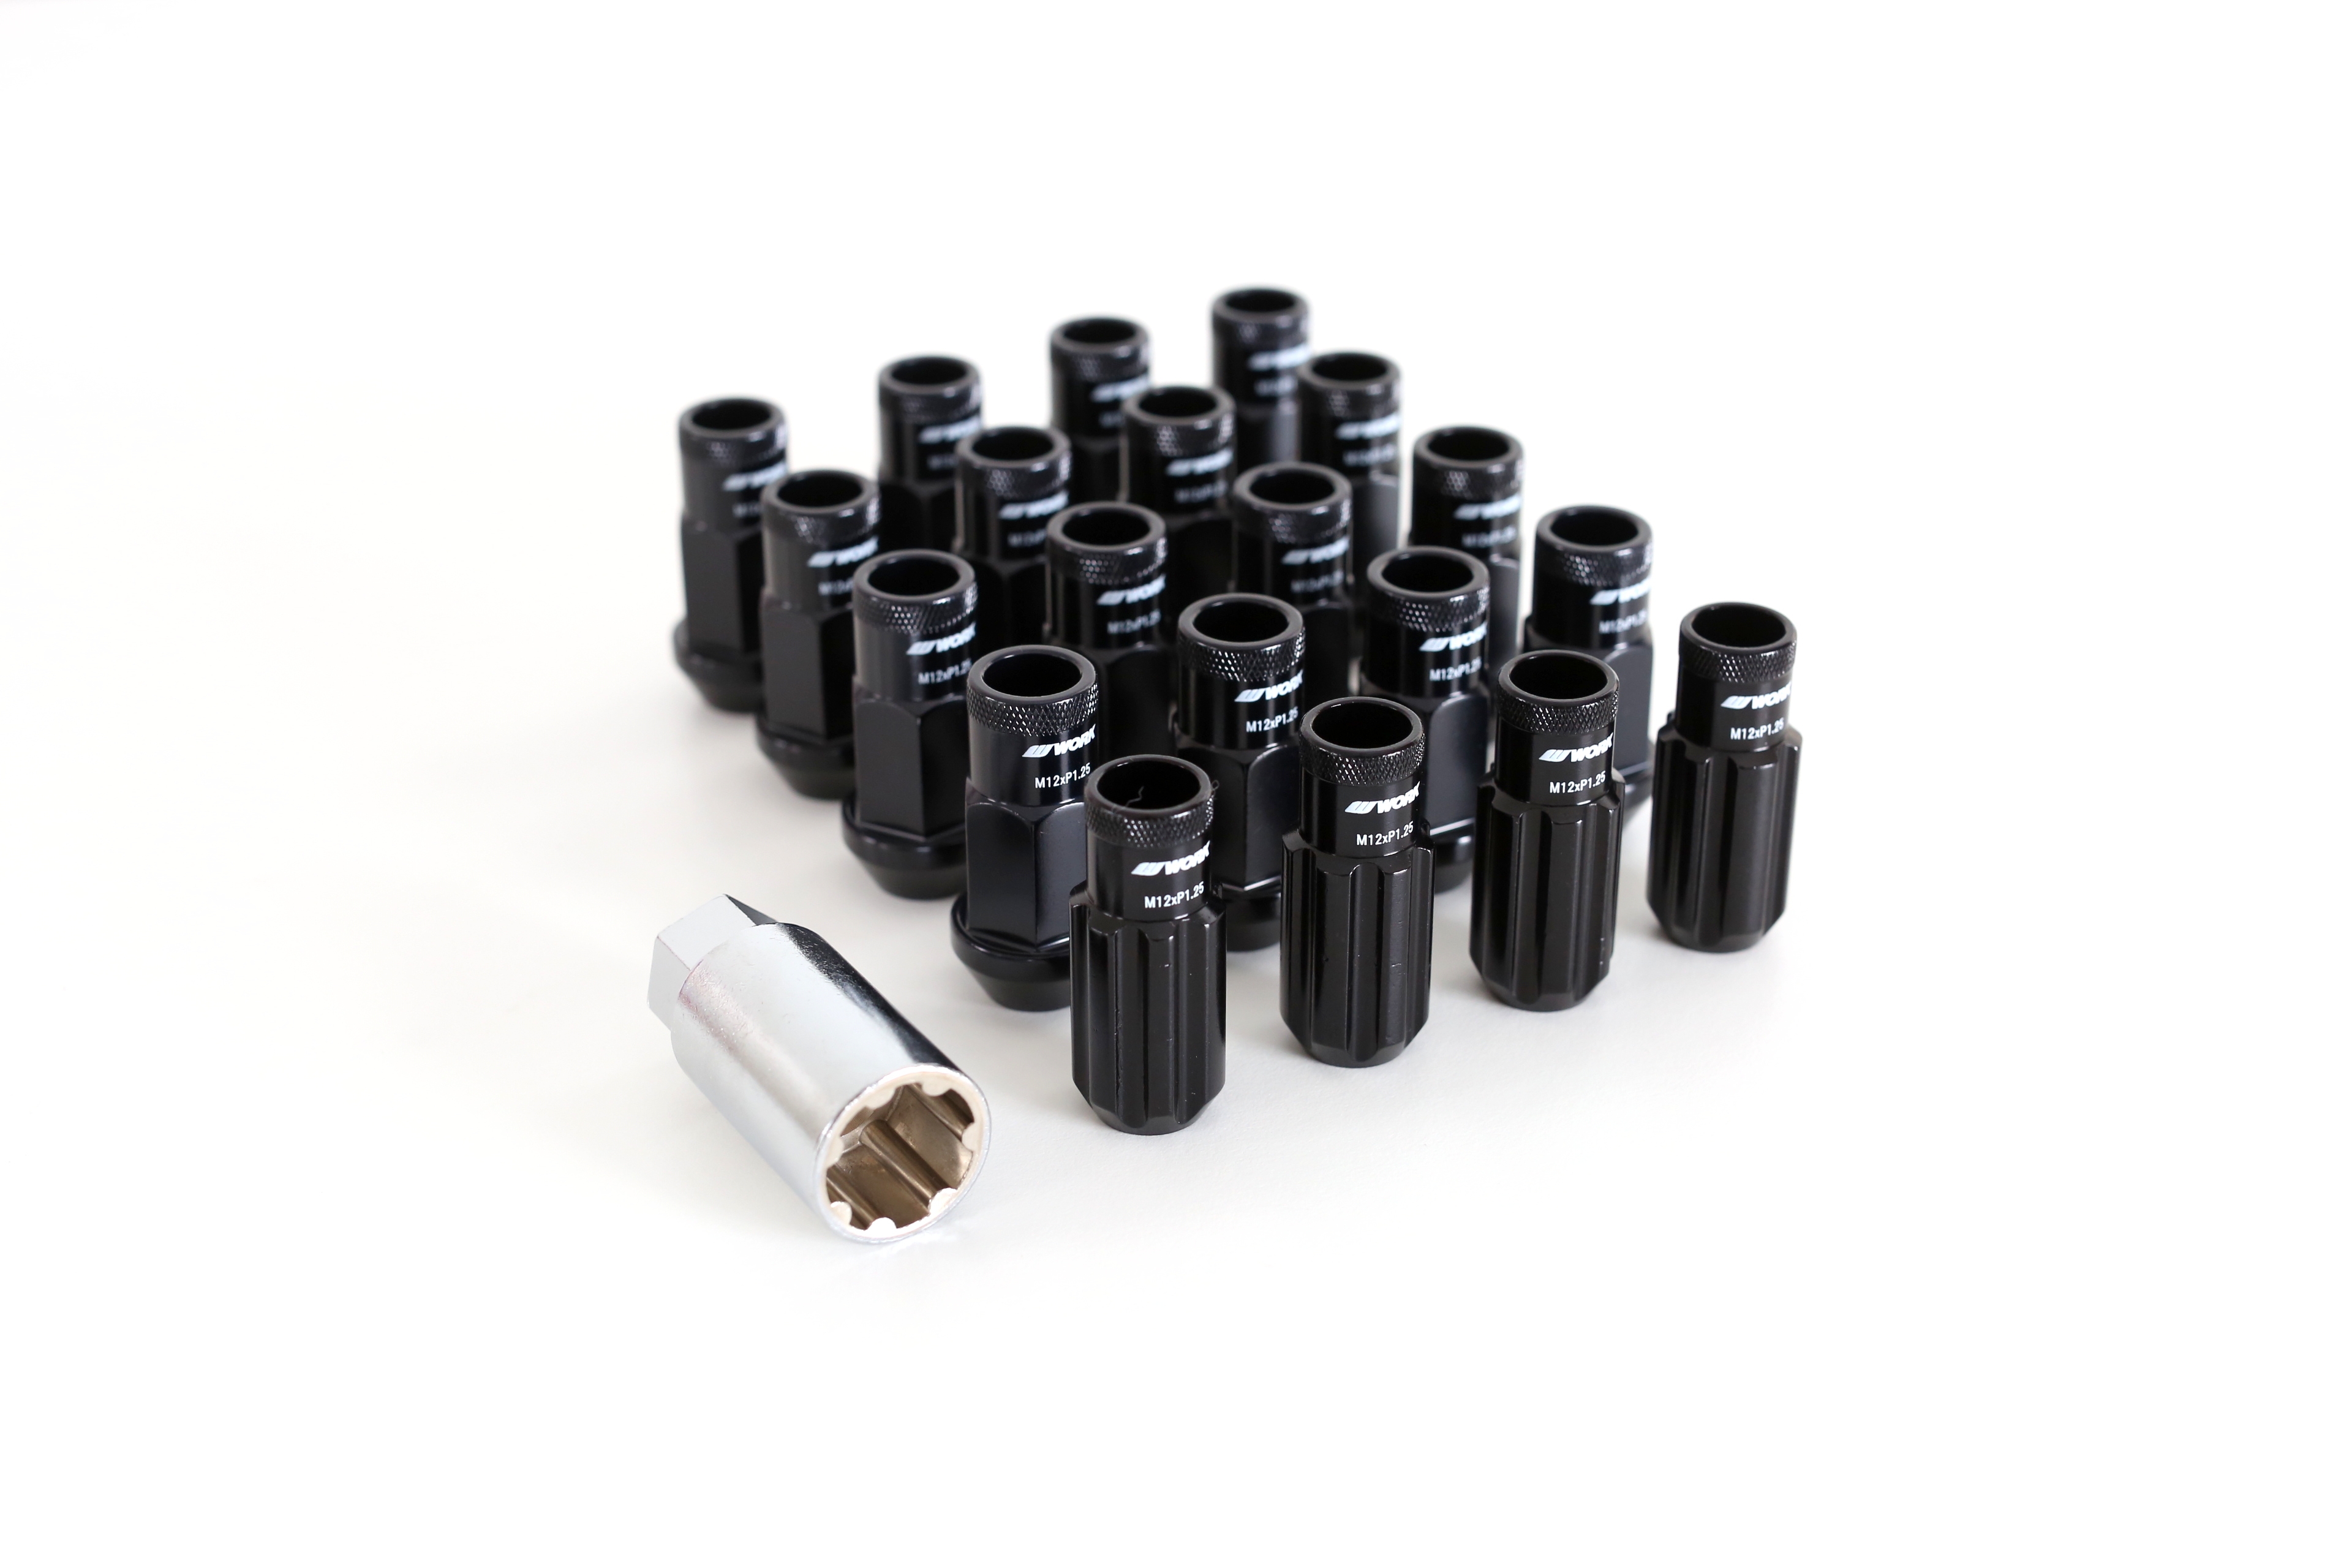 RS-Z Type Open End Lug Nuts